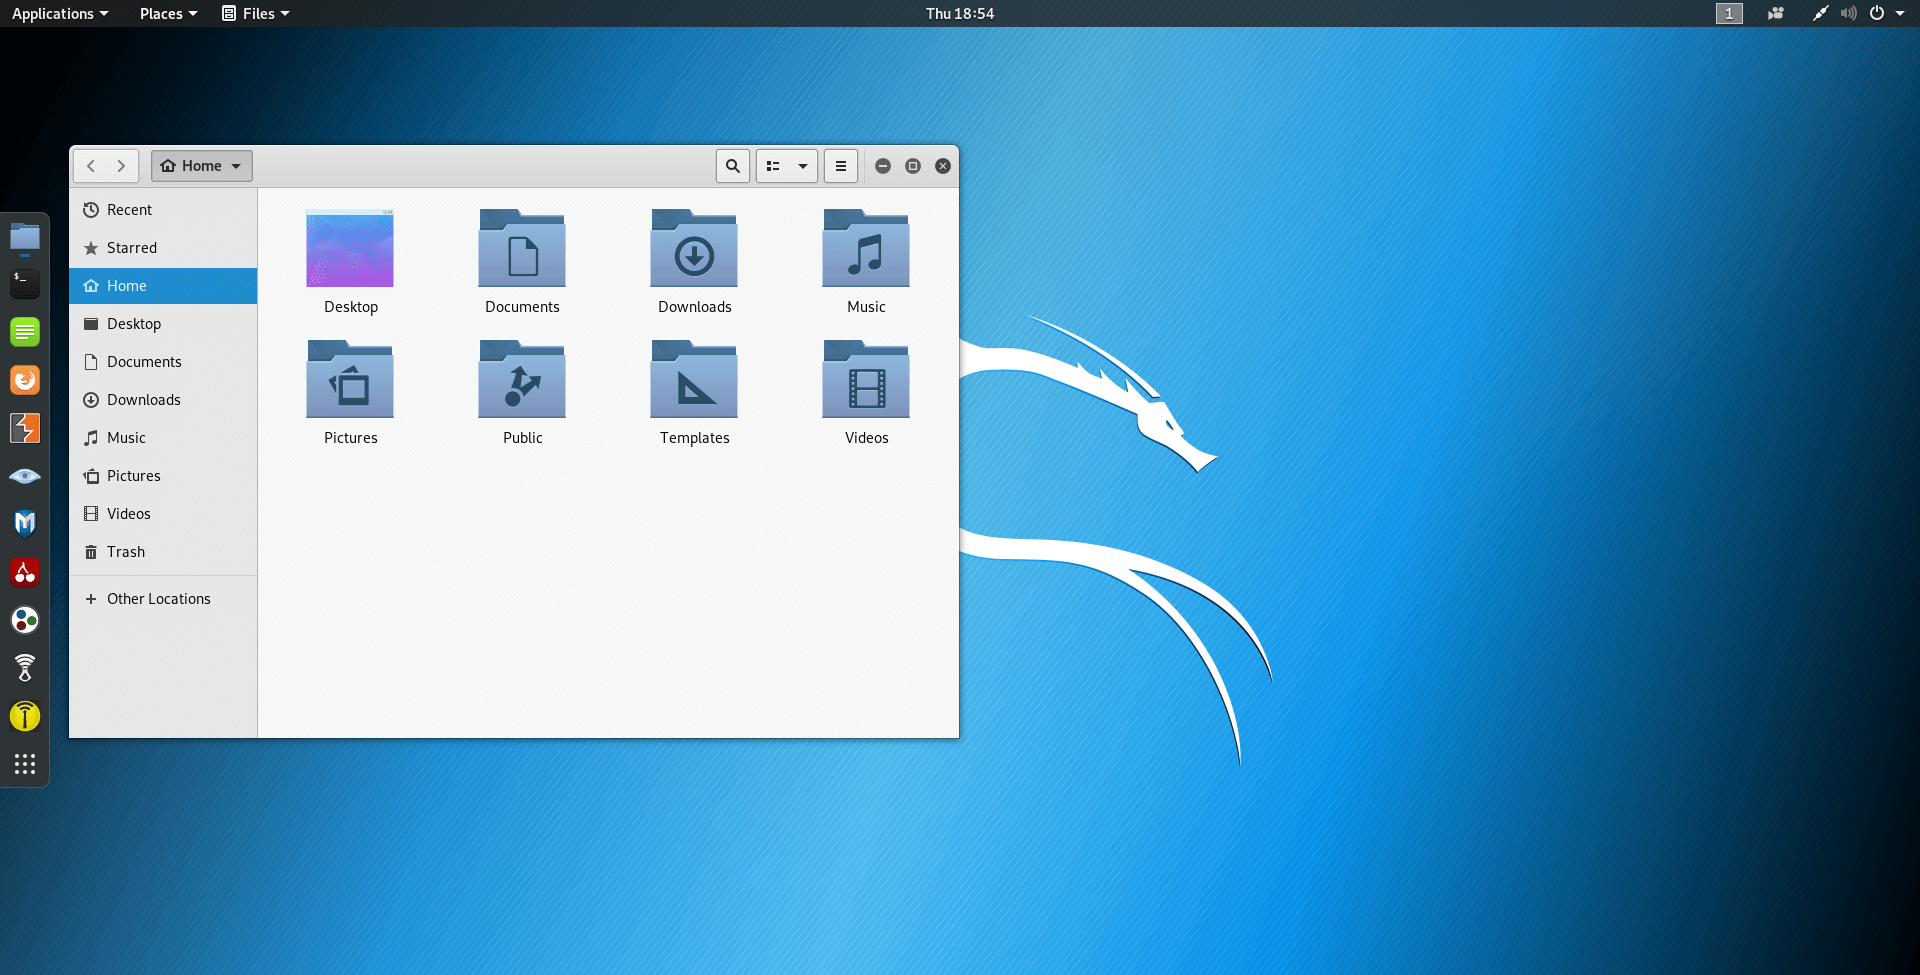 download kali linux iso for virtualbox